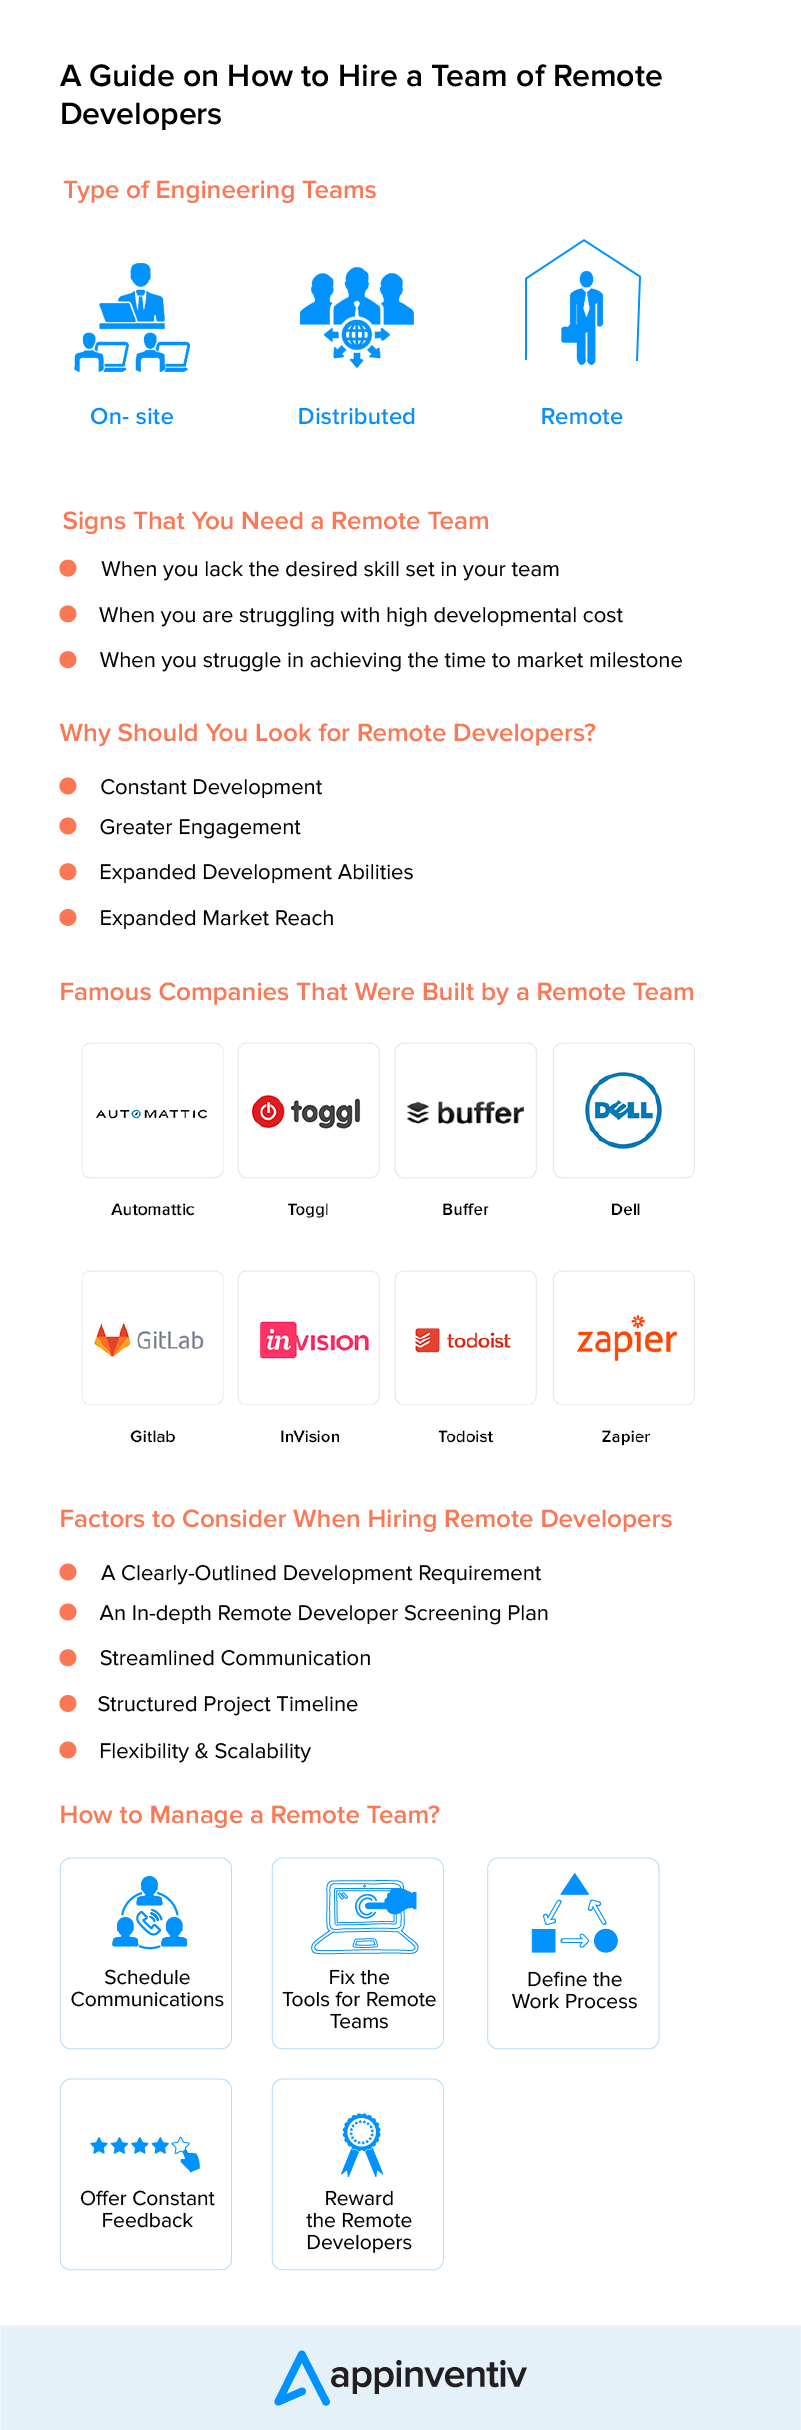 summary of how to hire & manage team of remote developers